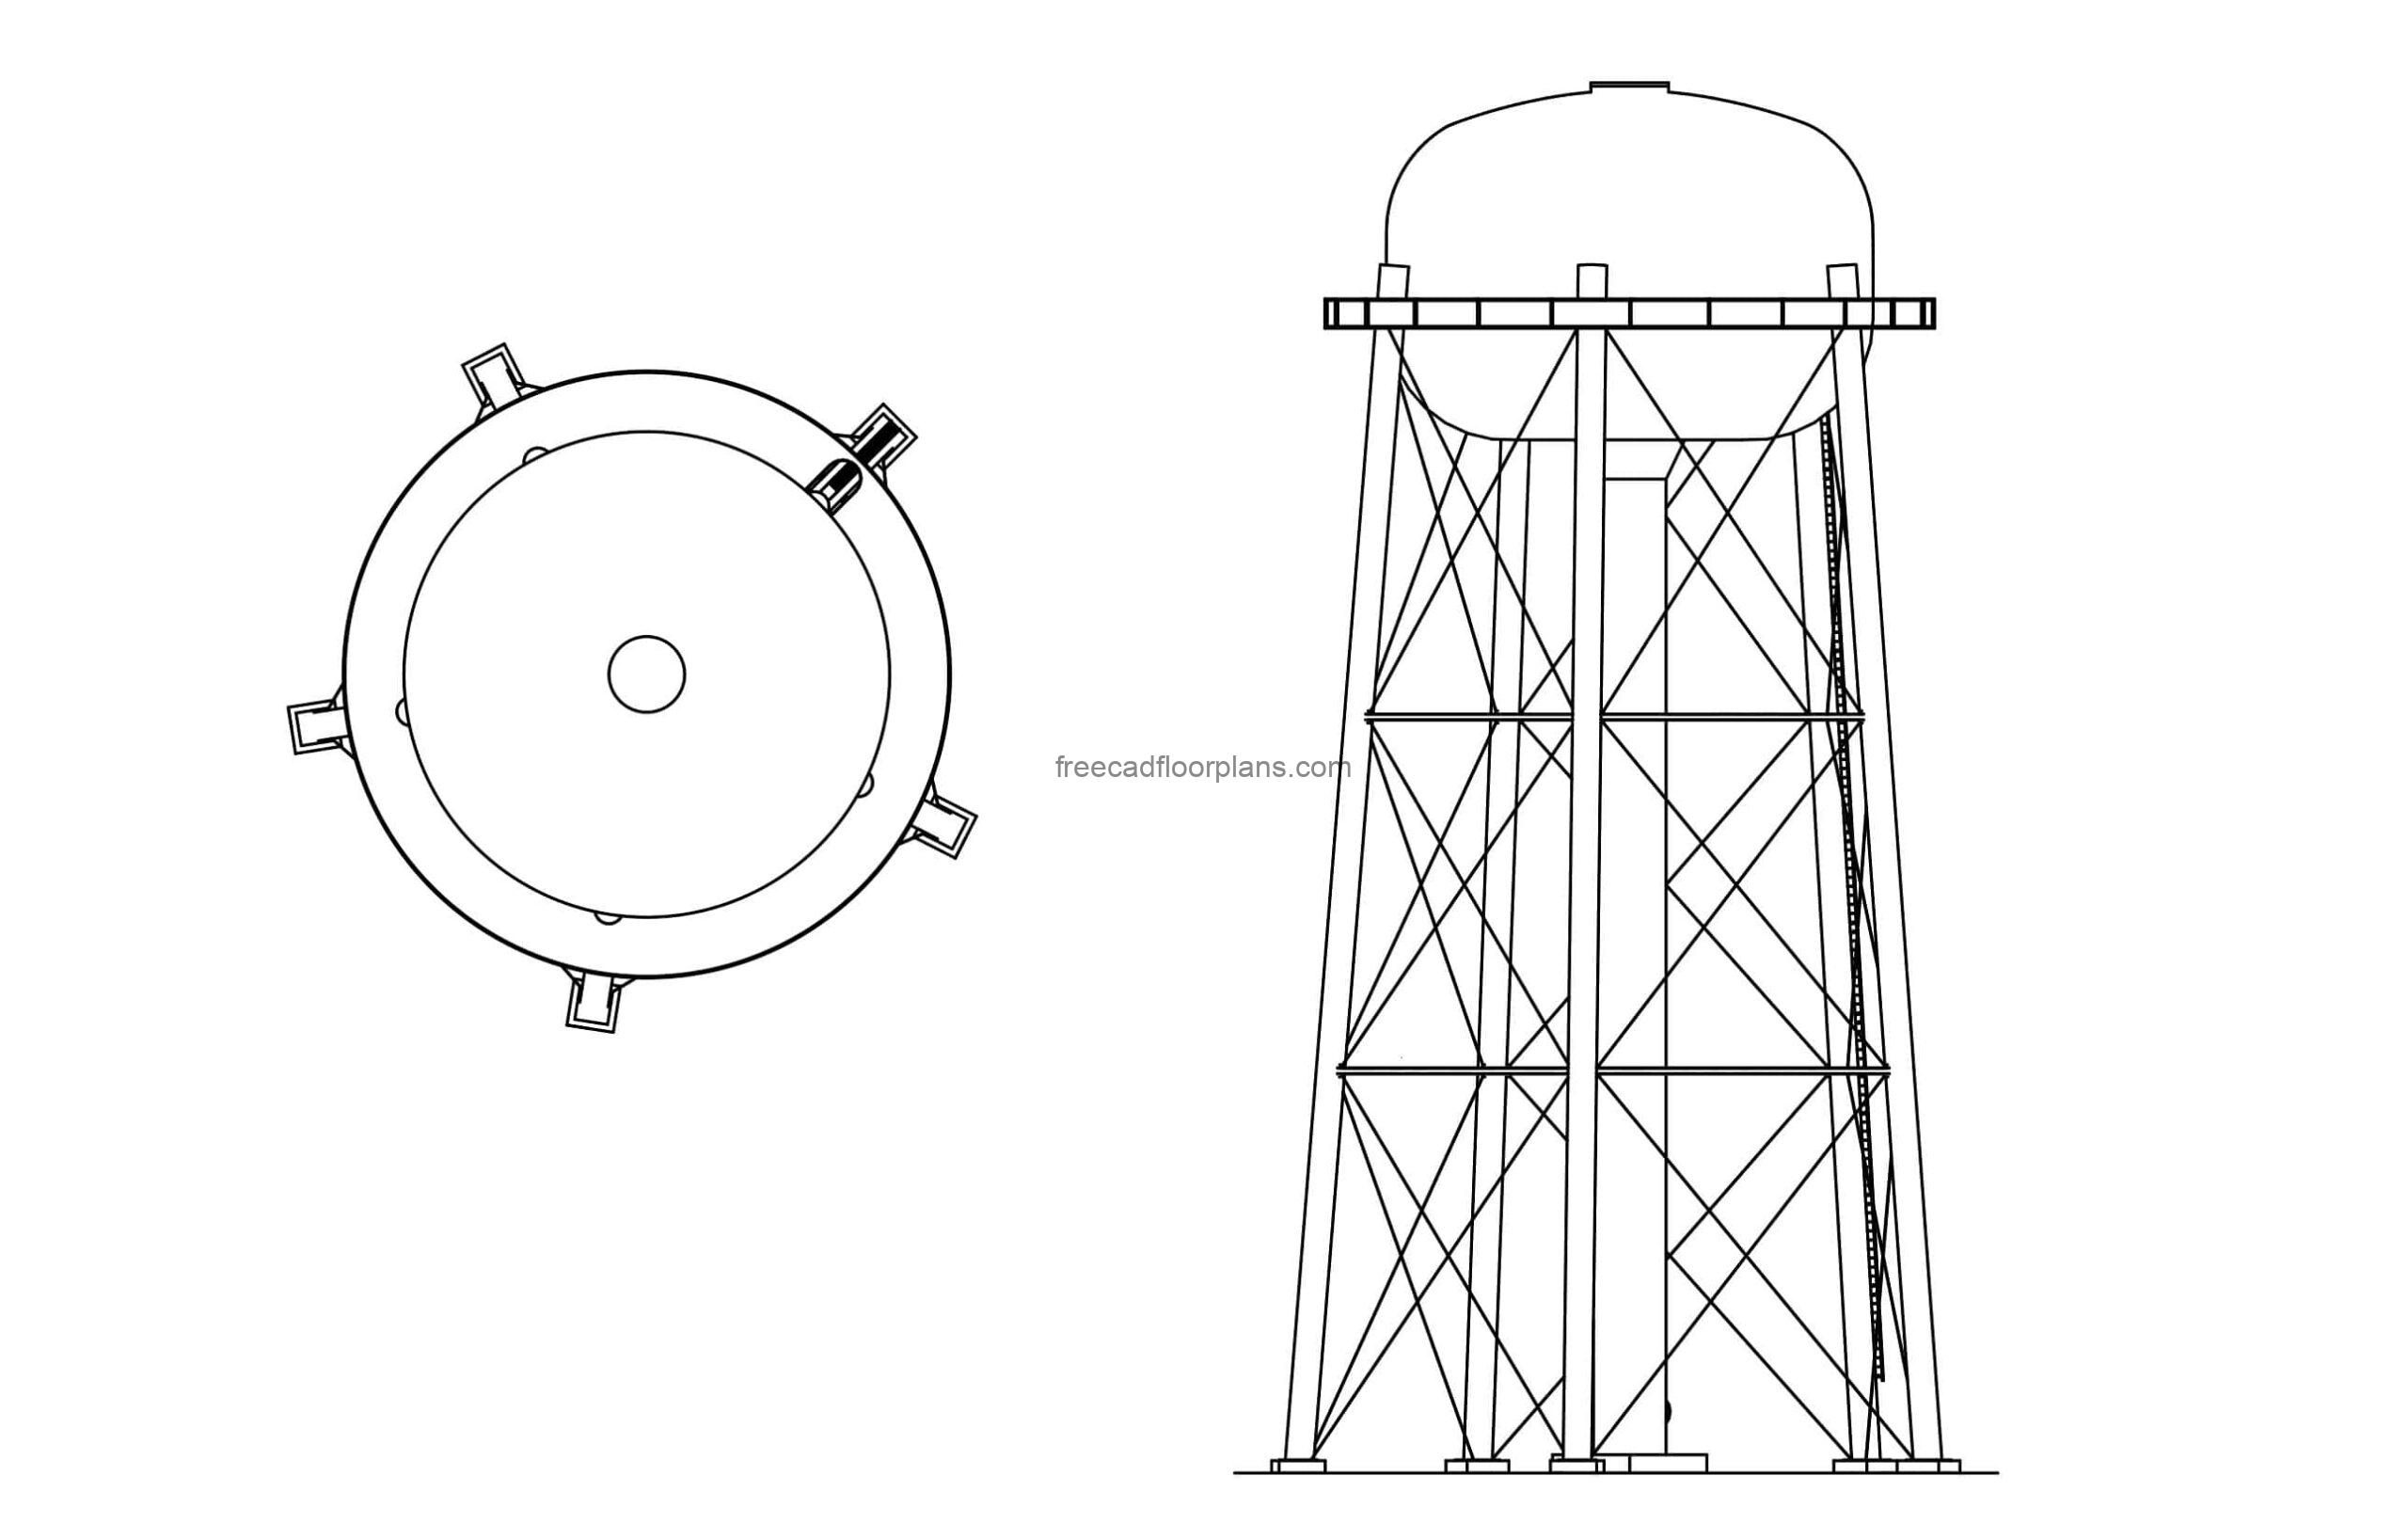 elevated water tank autocad drawing, plan and elevations 2d views, dwg file for free download